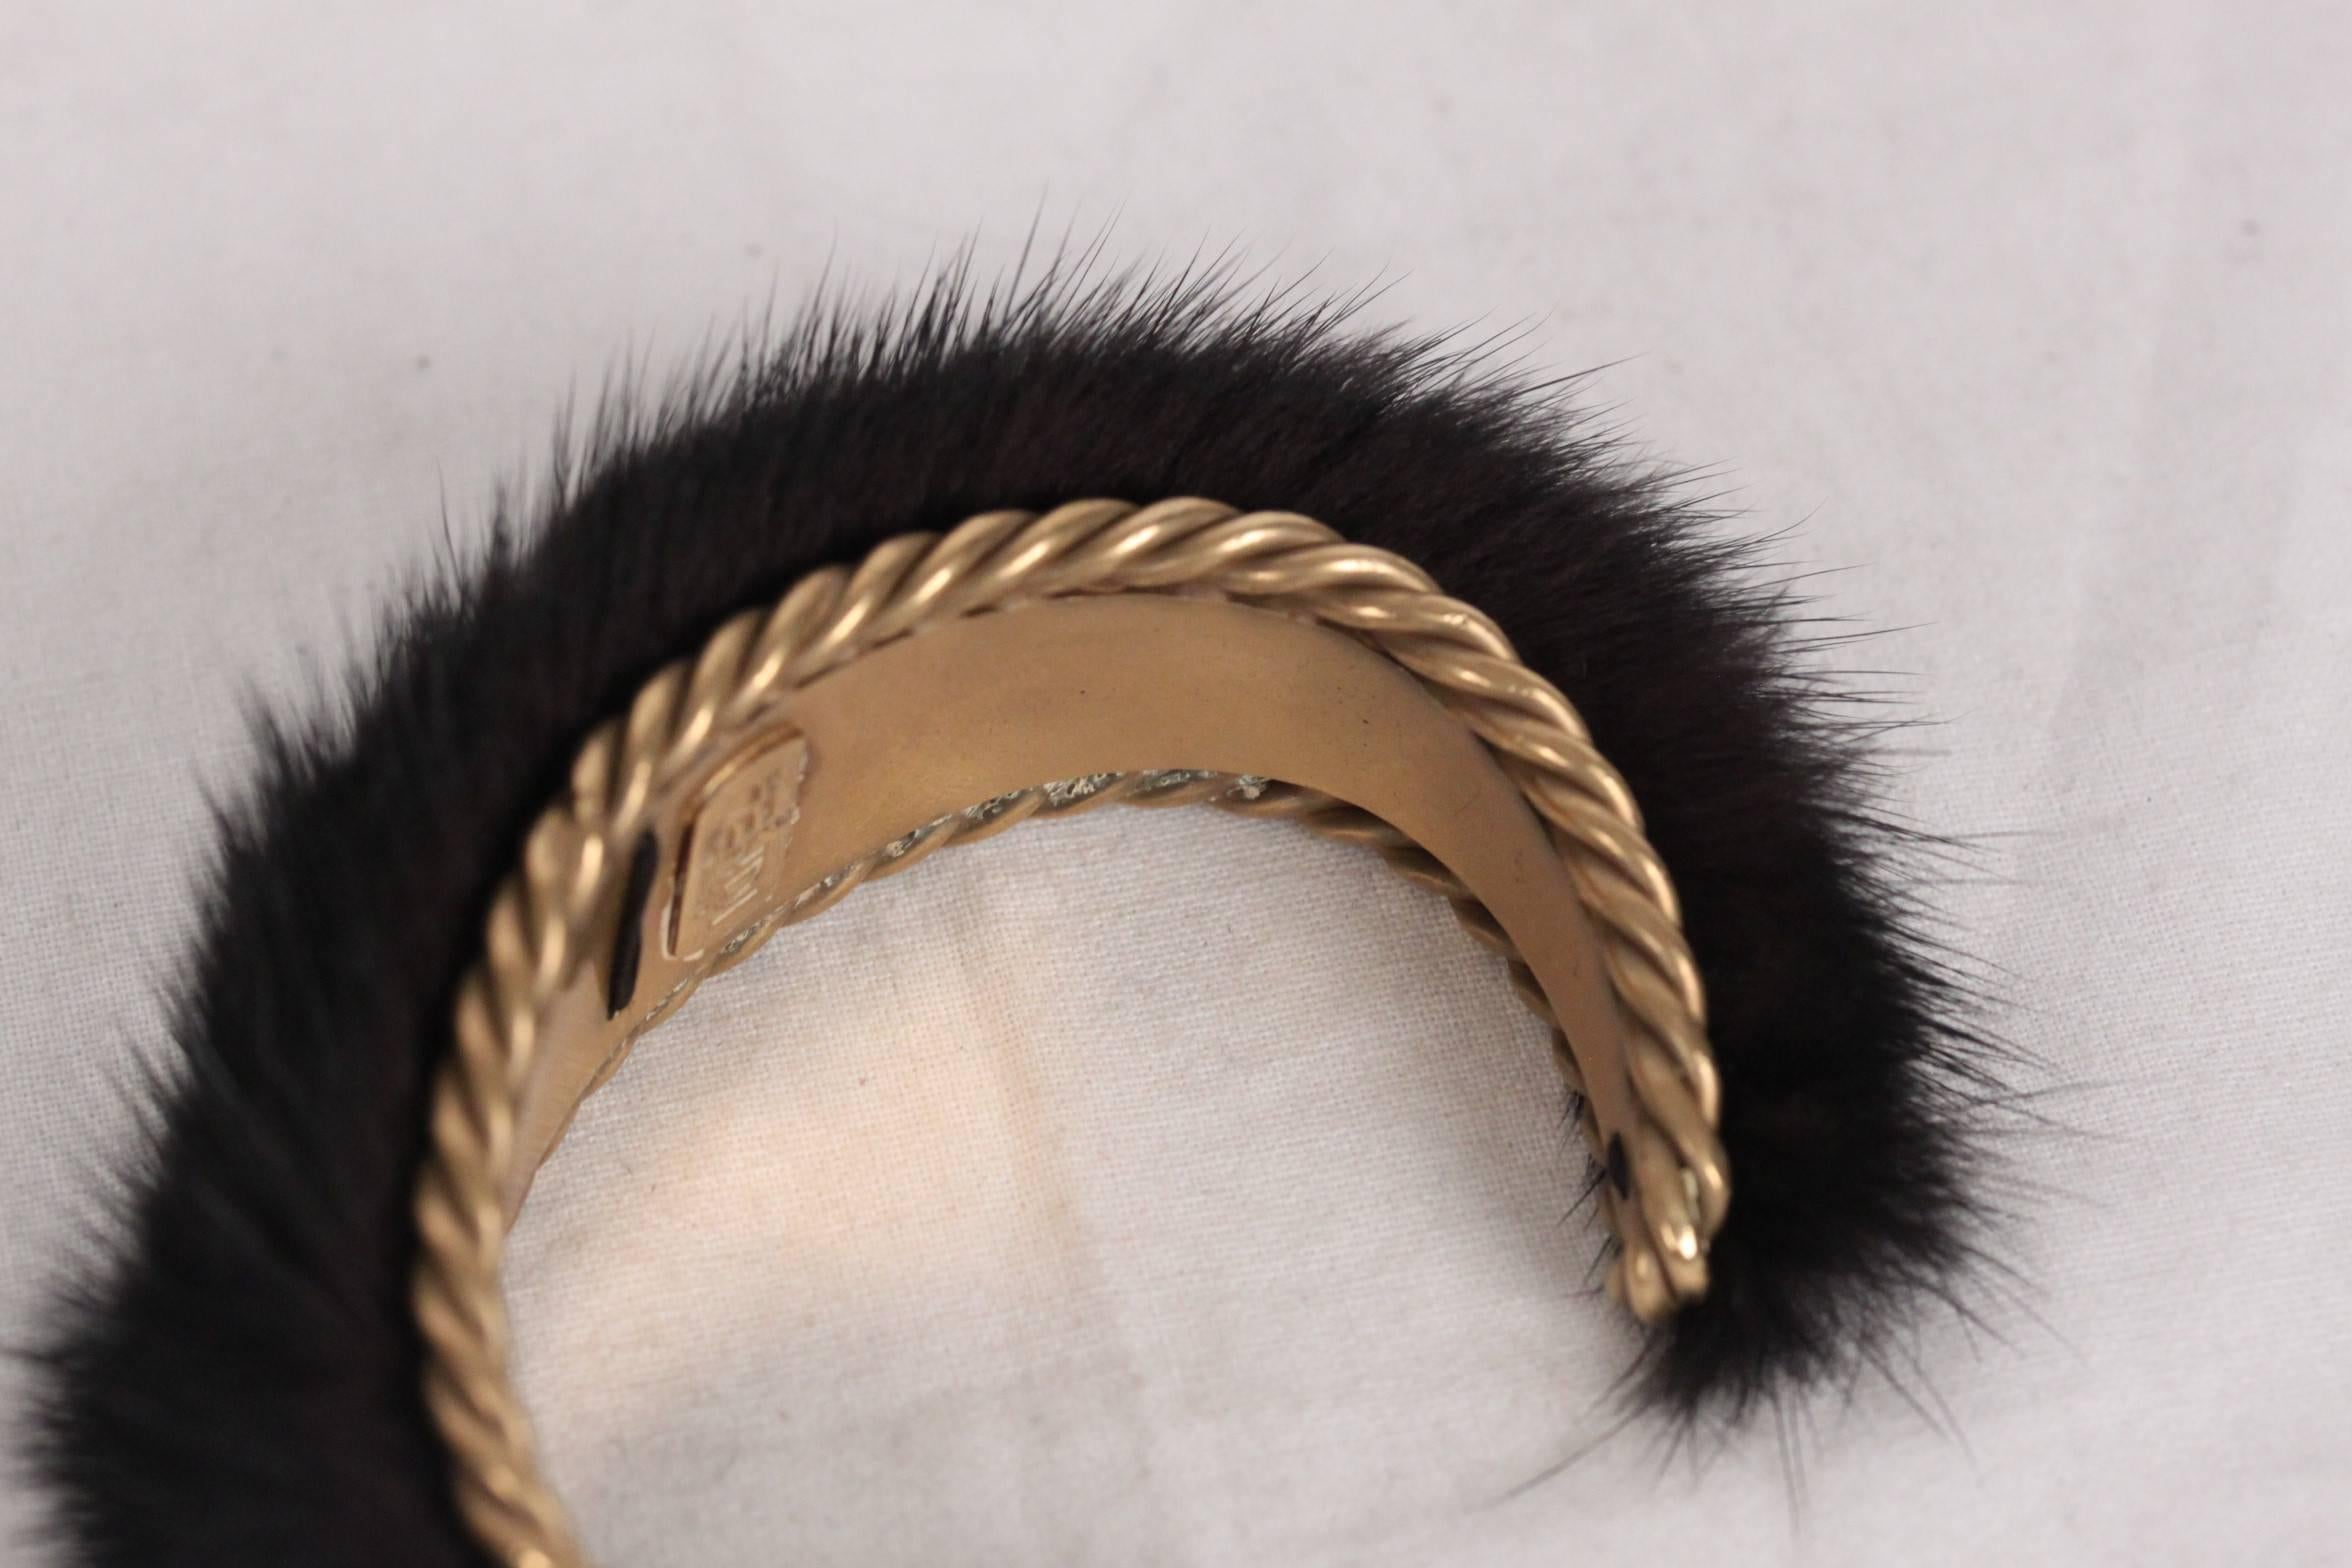 - Gold metal FENDI bracelet with fur top
- Color Black
- It will come with its original FENDI box
- Max. approx. internal diameter: 2.35 inches - 6,2 cm 
- Width: 1 inch - 2,5 cm 
 

Logos & Tags: 'FENDI - made in Italy' inside the